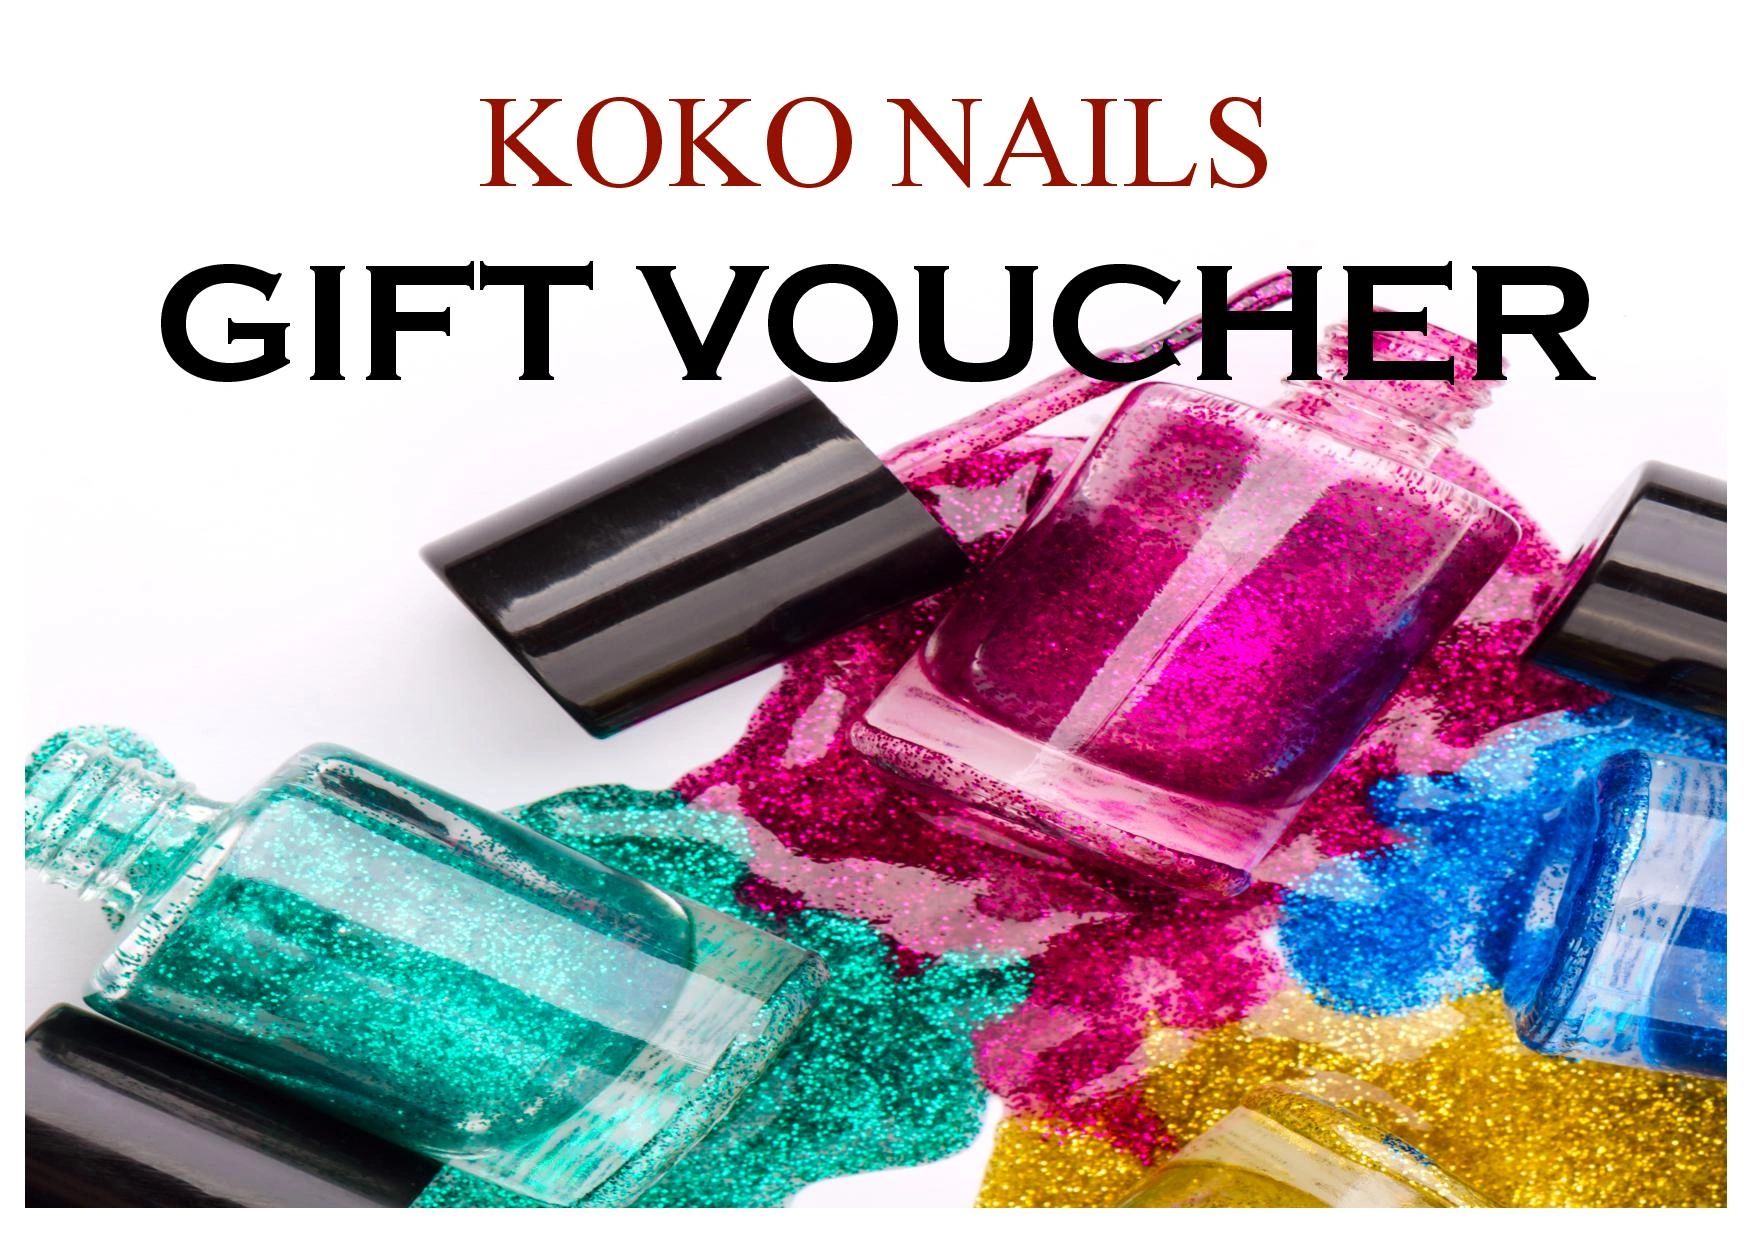  Gift Vouchers are sent electronically to your recipients e-mail.
Choose delivery to be made immedia